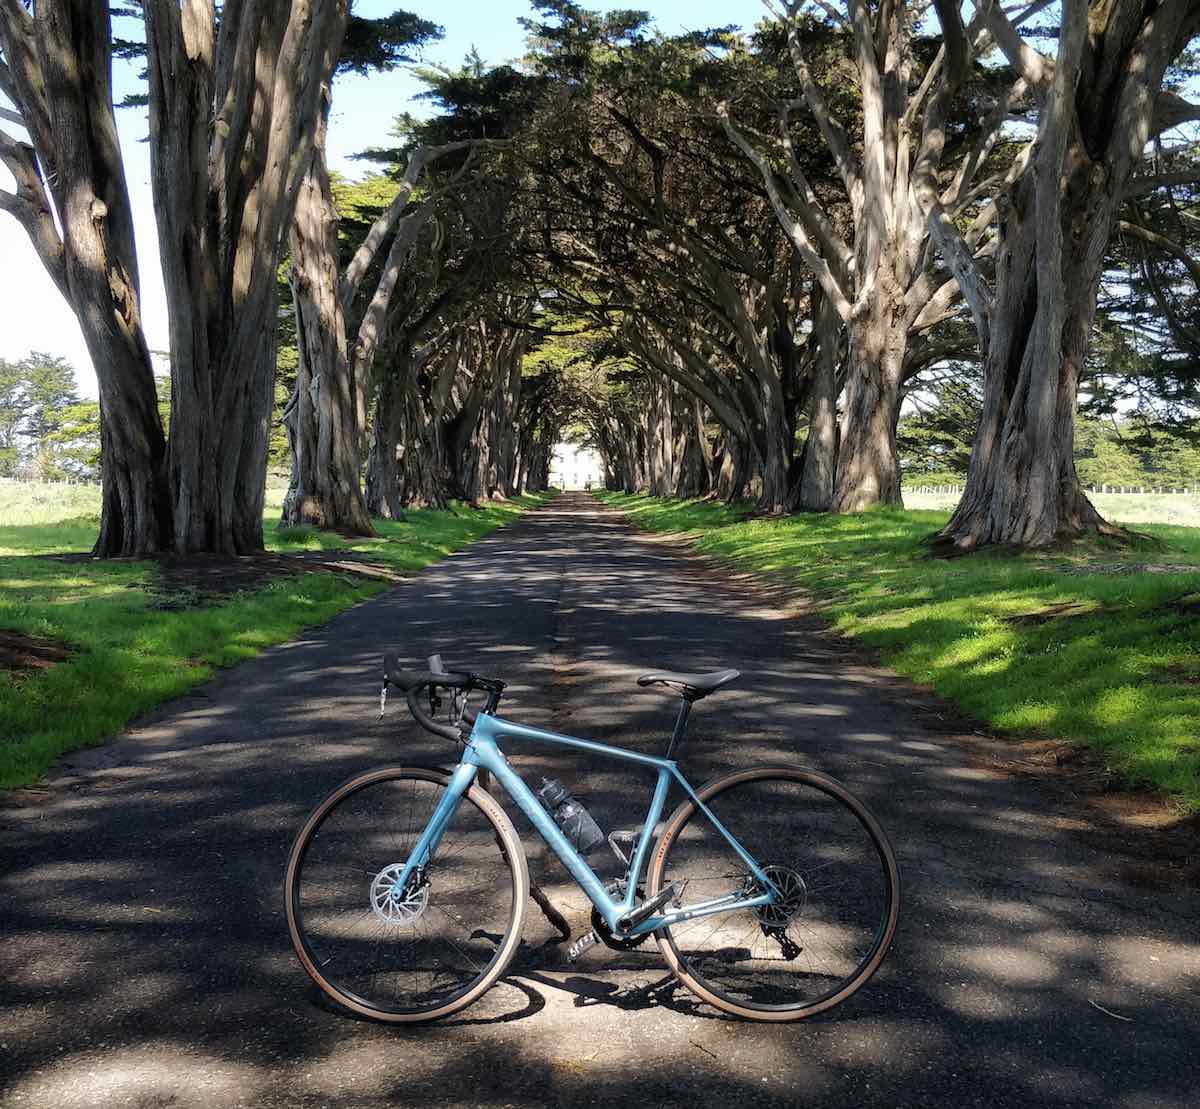 bikerumor pic of the day bike riding in west marin county california.